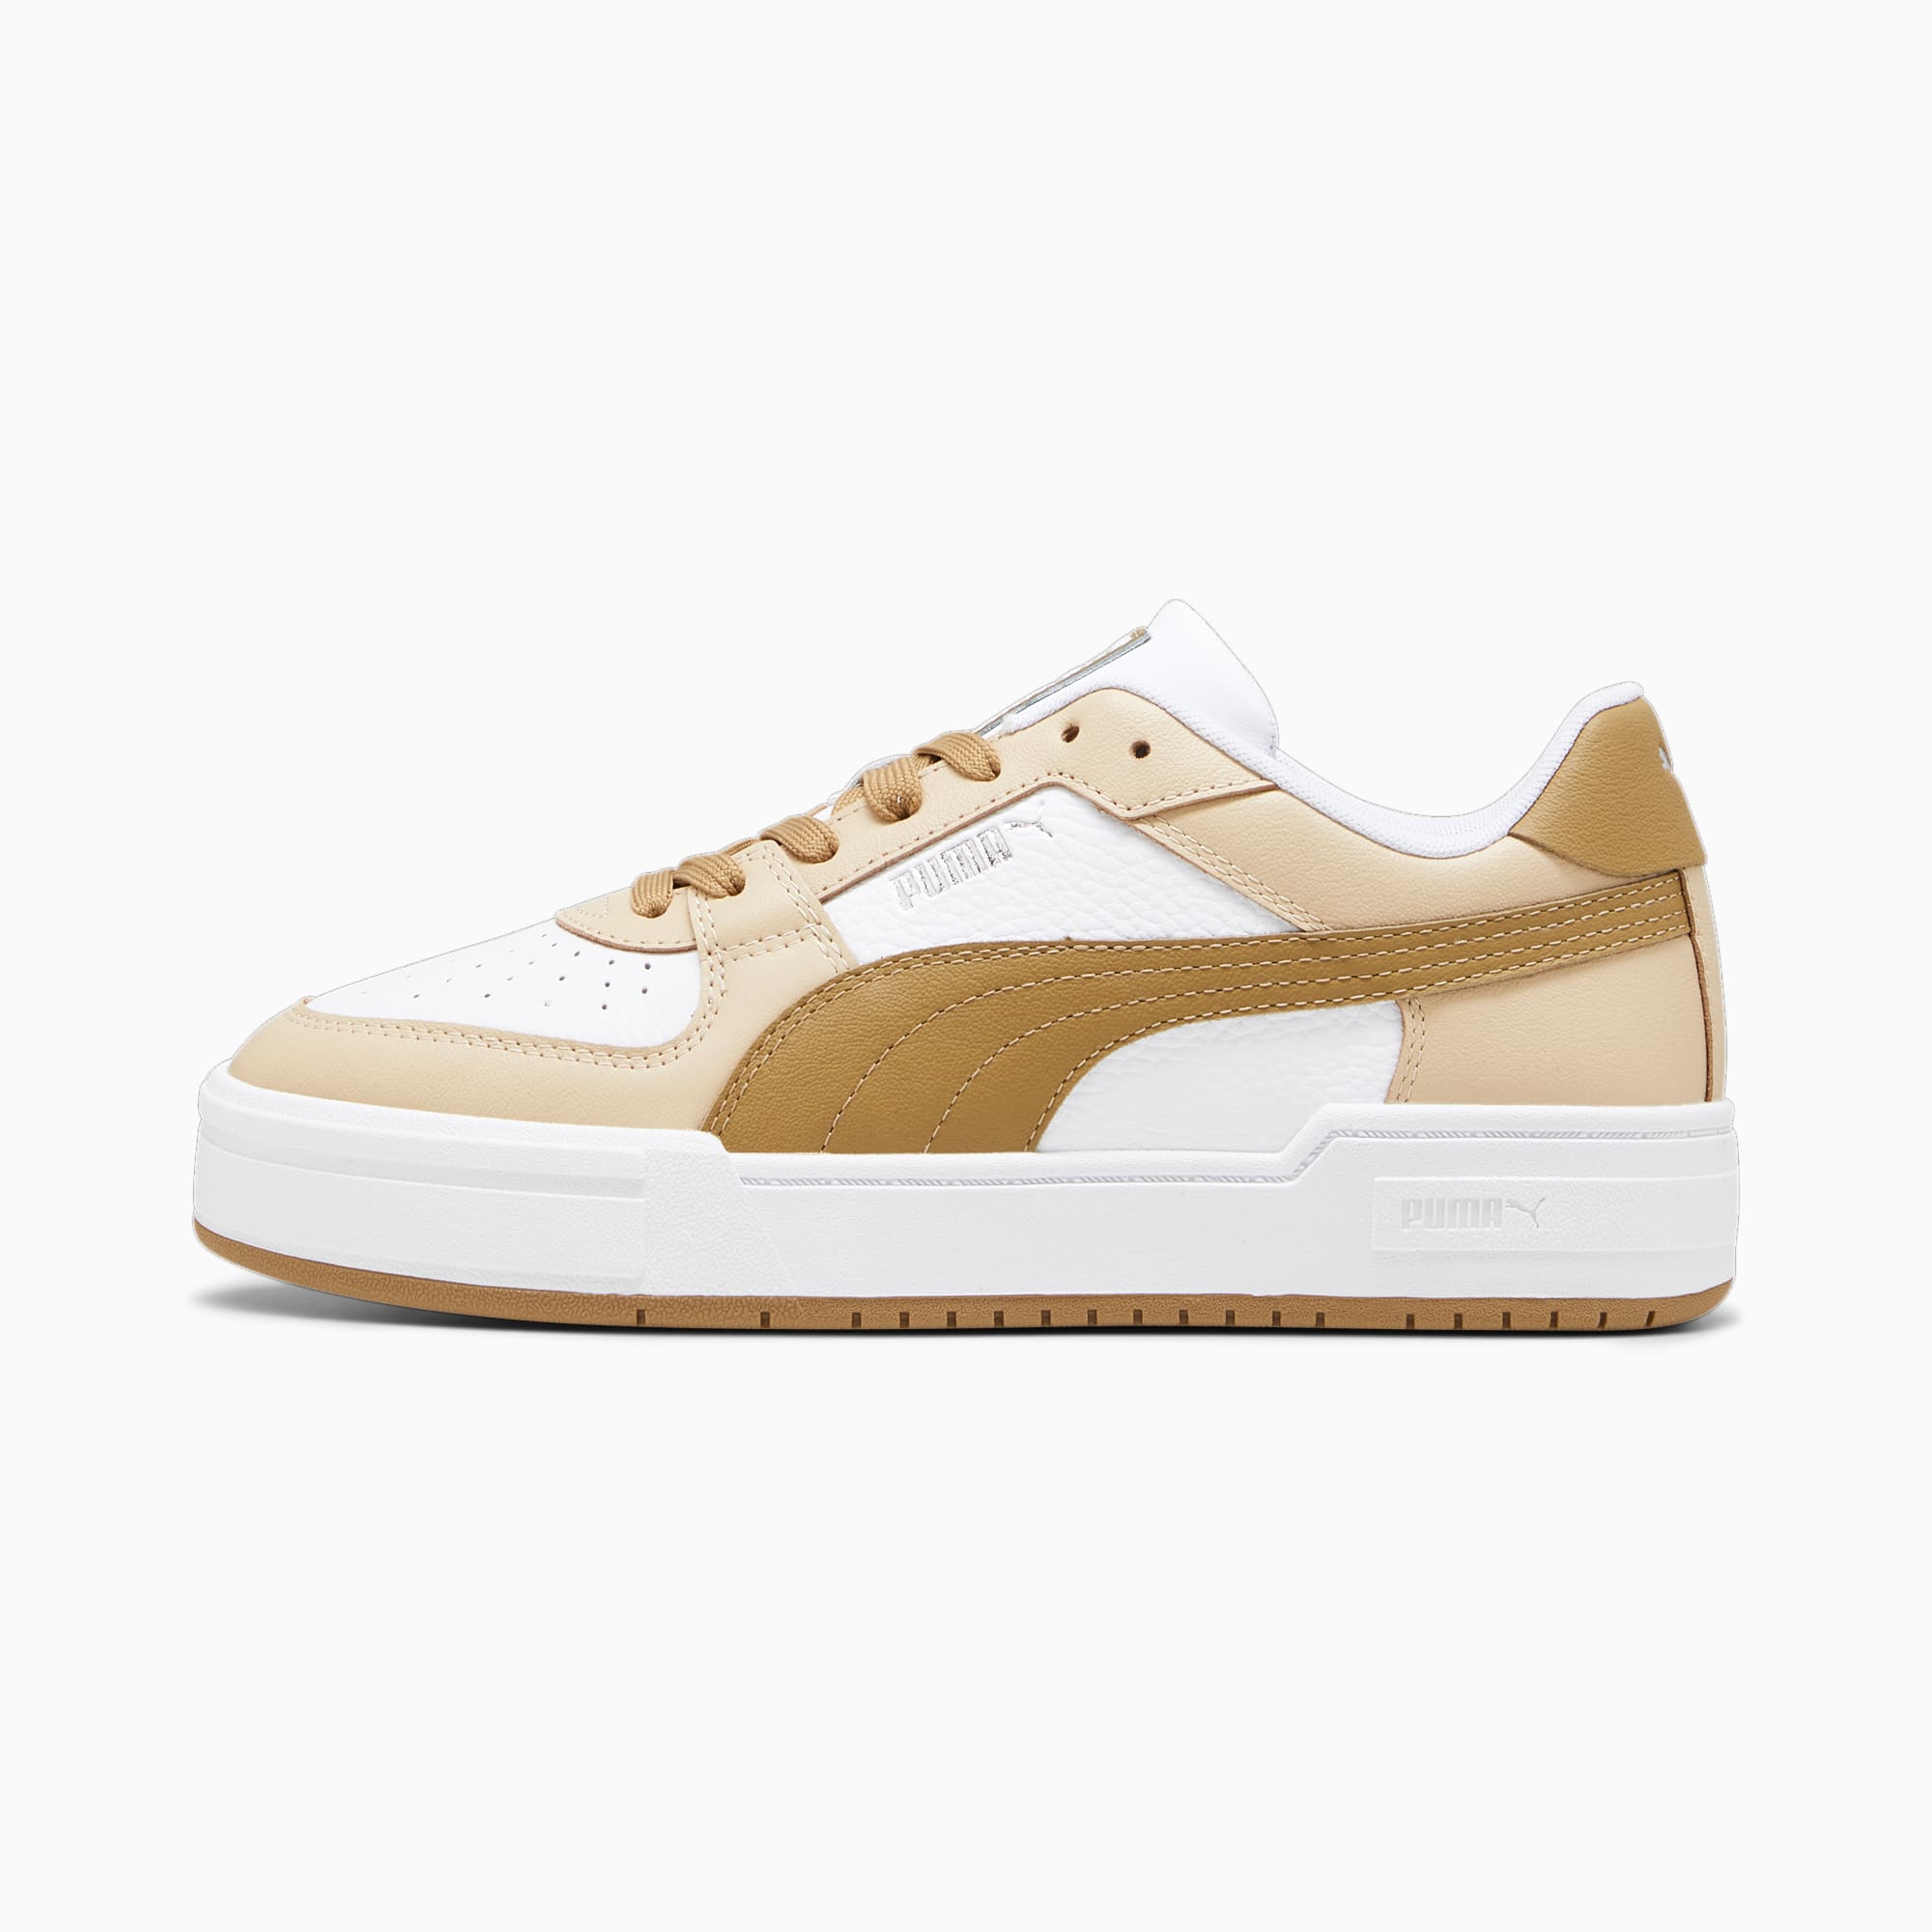 Women's PUMA Ca Pro Classic Trainers, White/Granola/Toasted, Size 46, Shoes